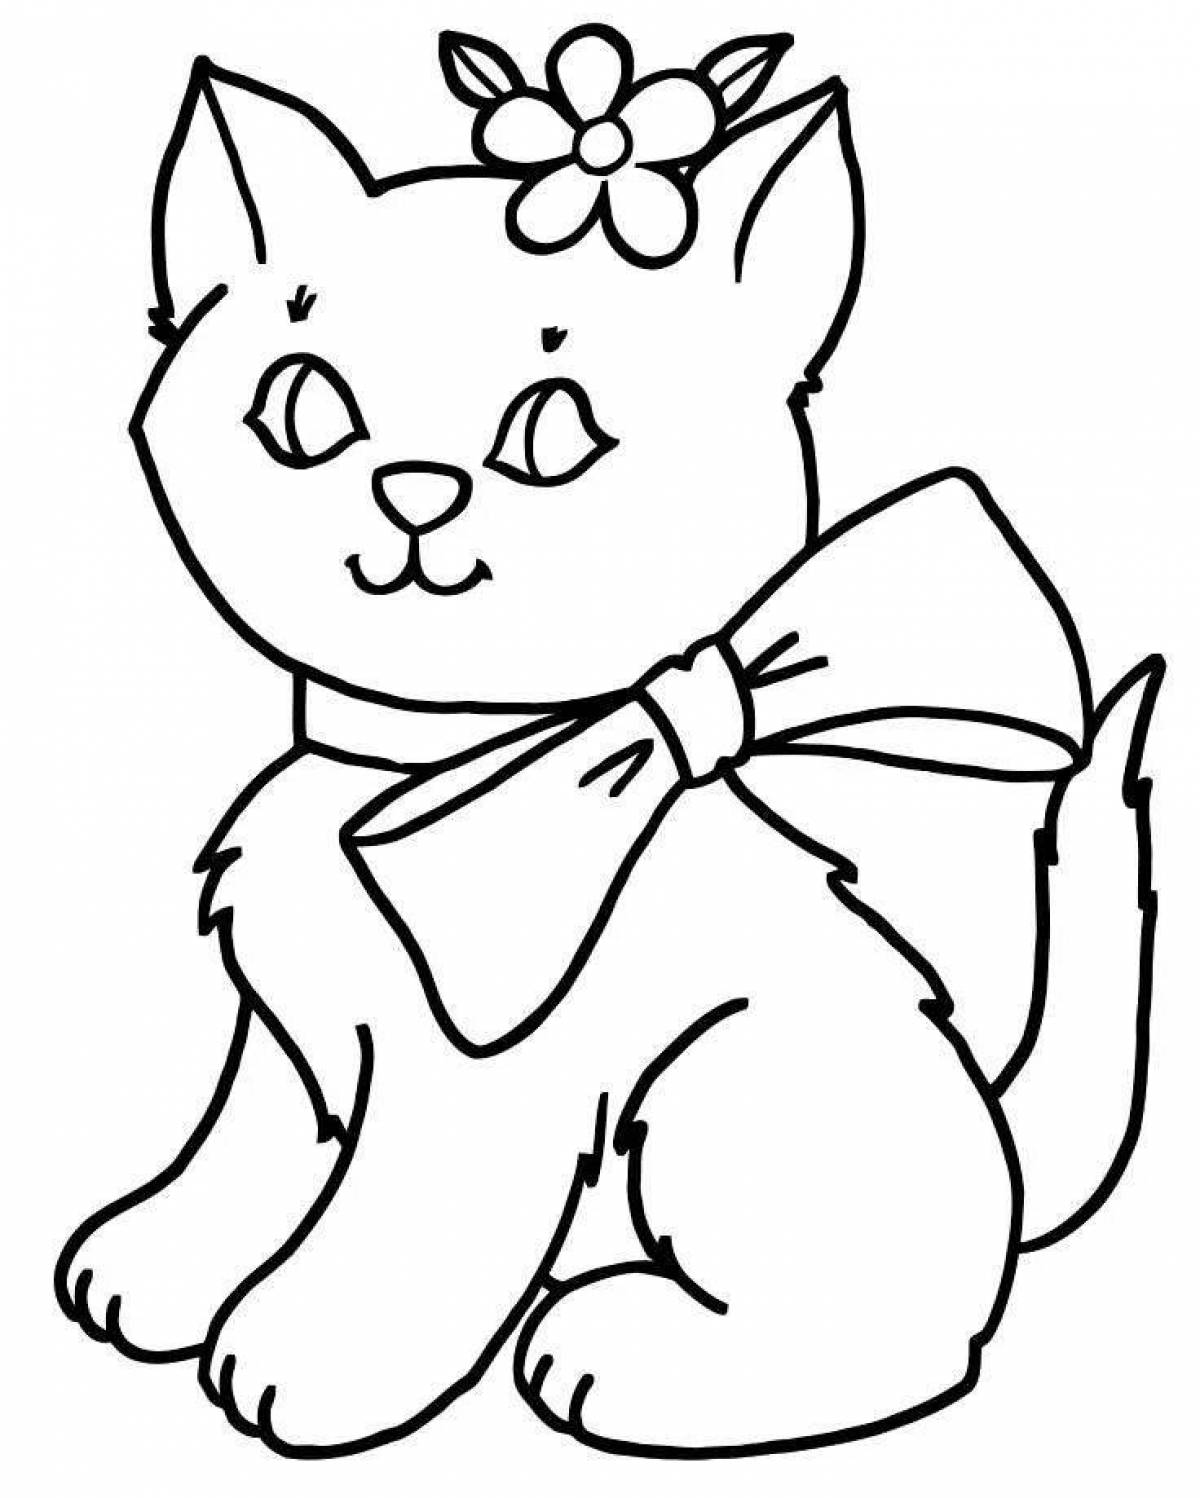 Coloring book twinkling kitten for children 3-4 years old